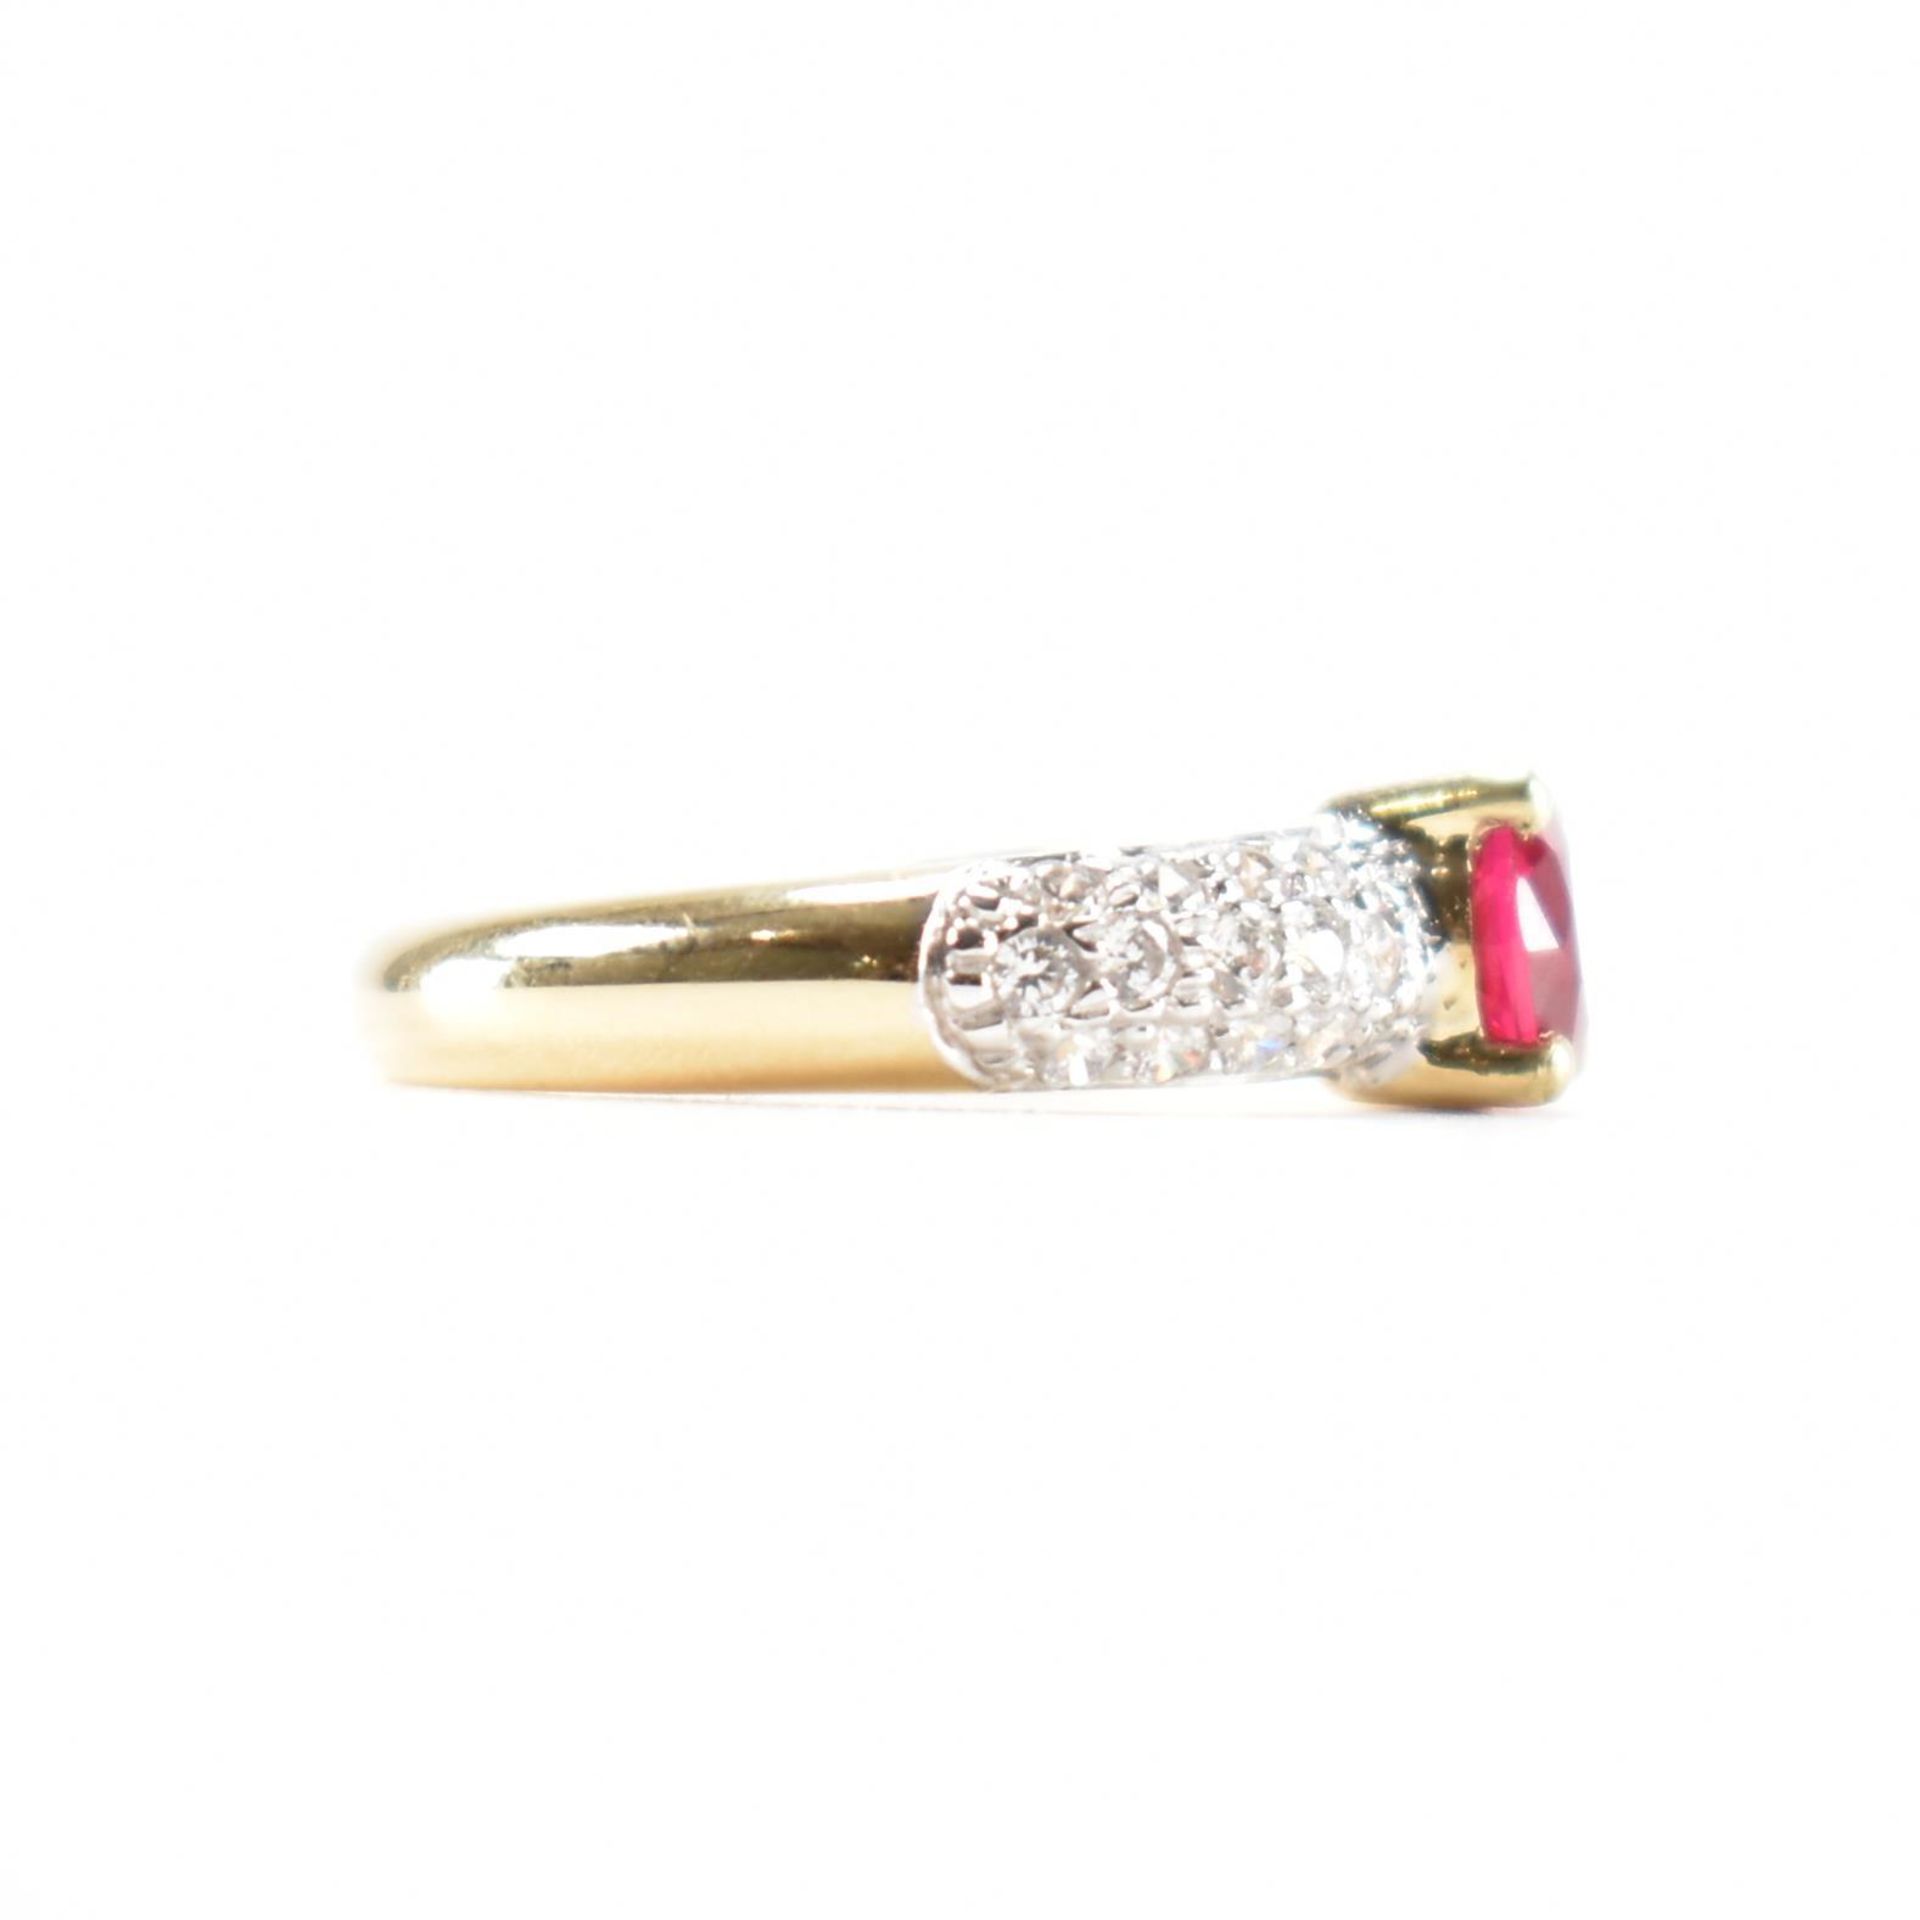 HALLMARKED 9CT GOLD SYNTHETIC RUBY & CZ RING - Image 4 of 7